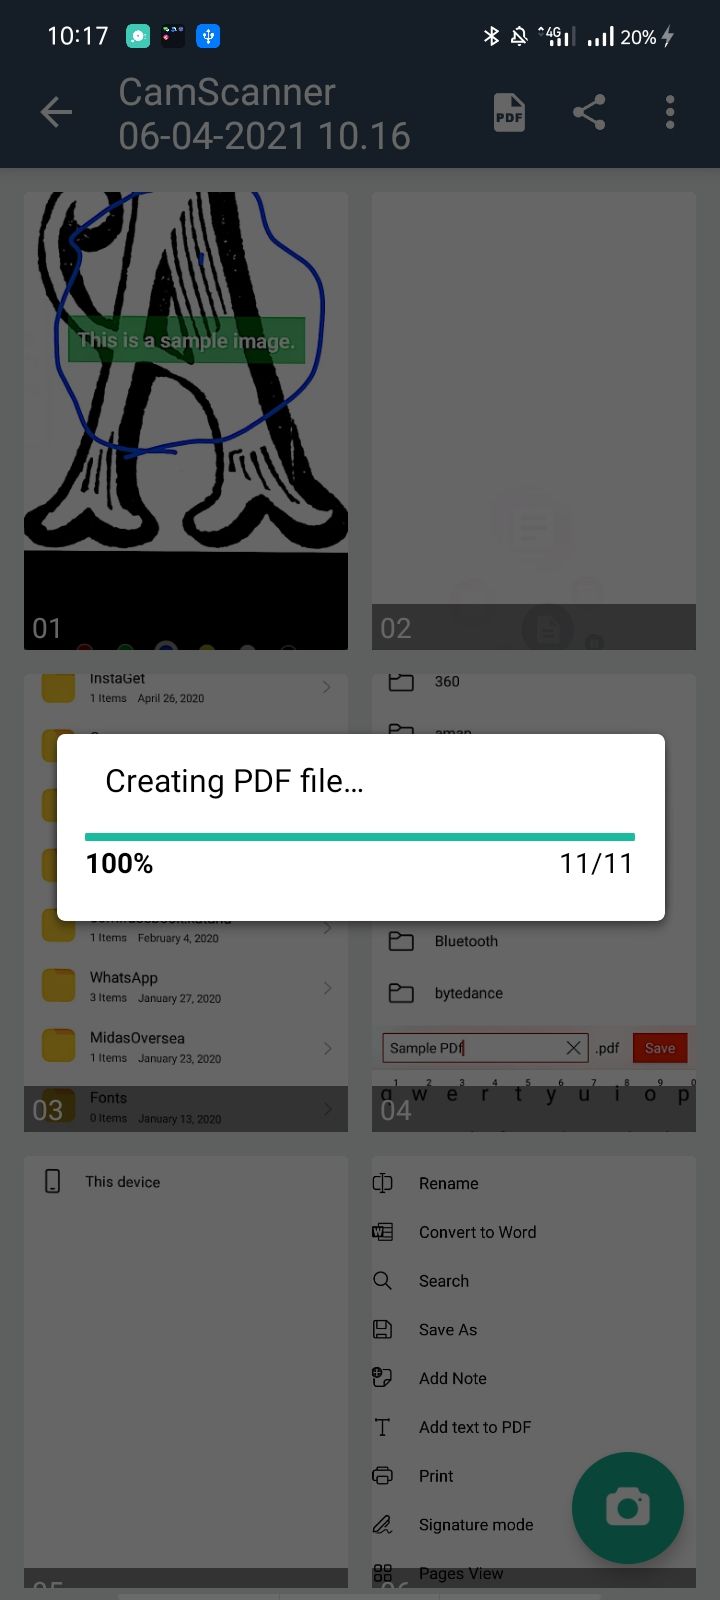 Converting Images into PDF in CamScanner App